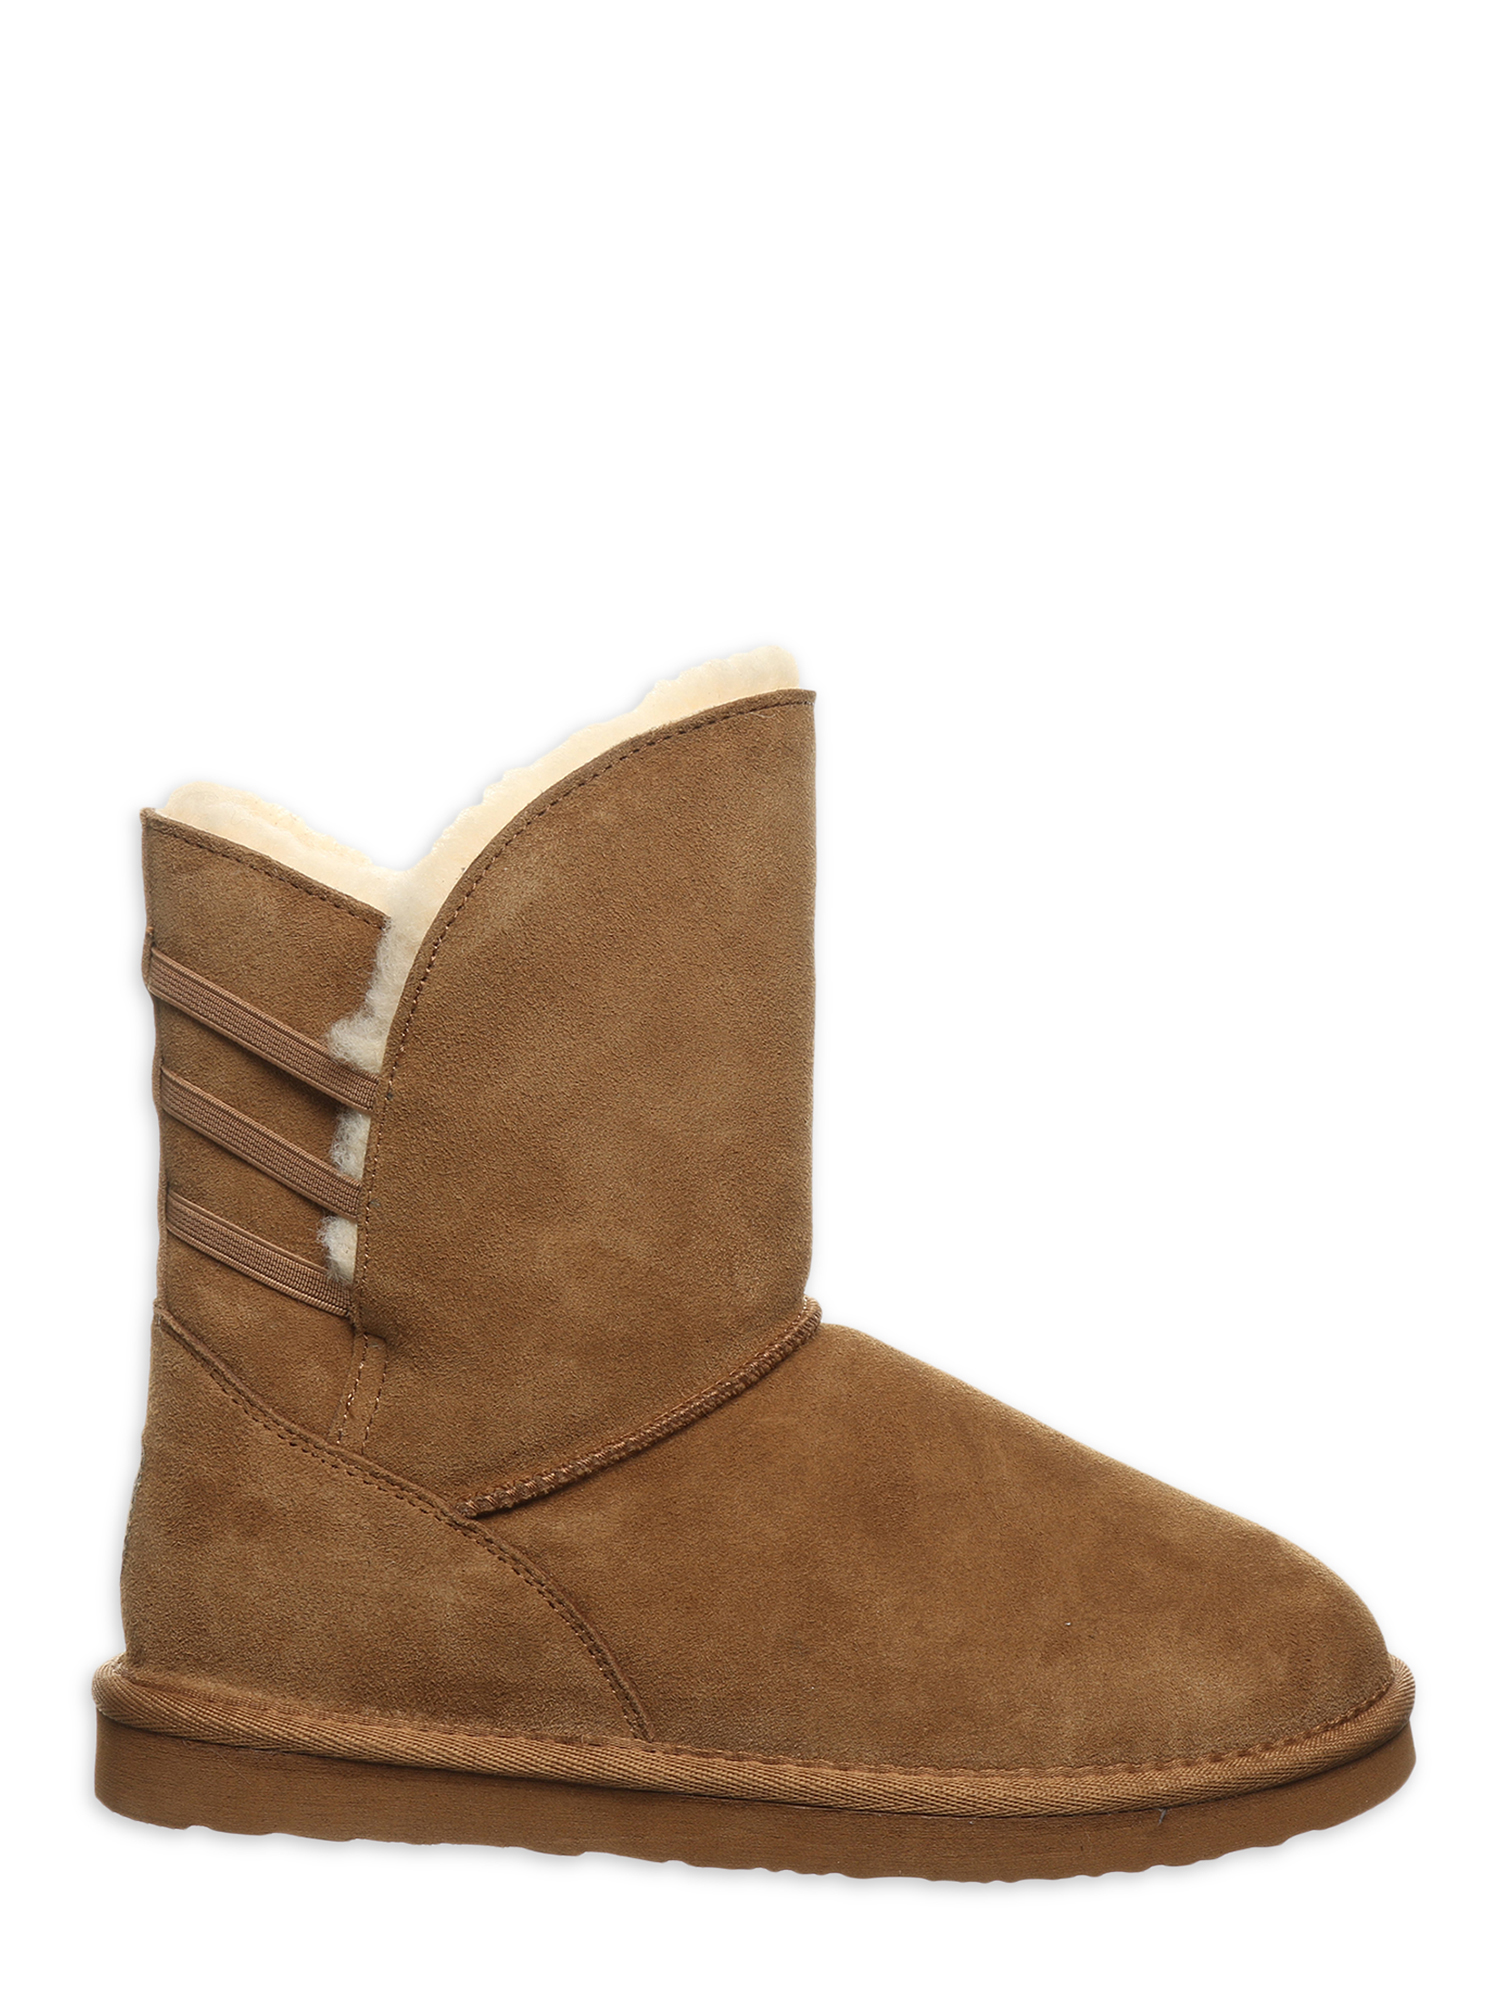 Pawz by Bearpaw Womens Everleigh Faux Fur Lined Suede Boot - image 2 of 5